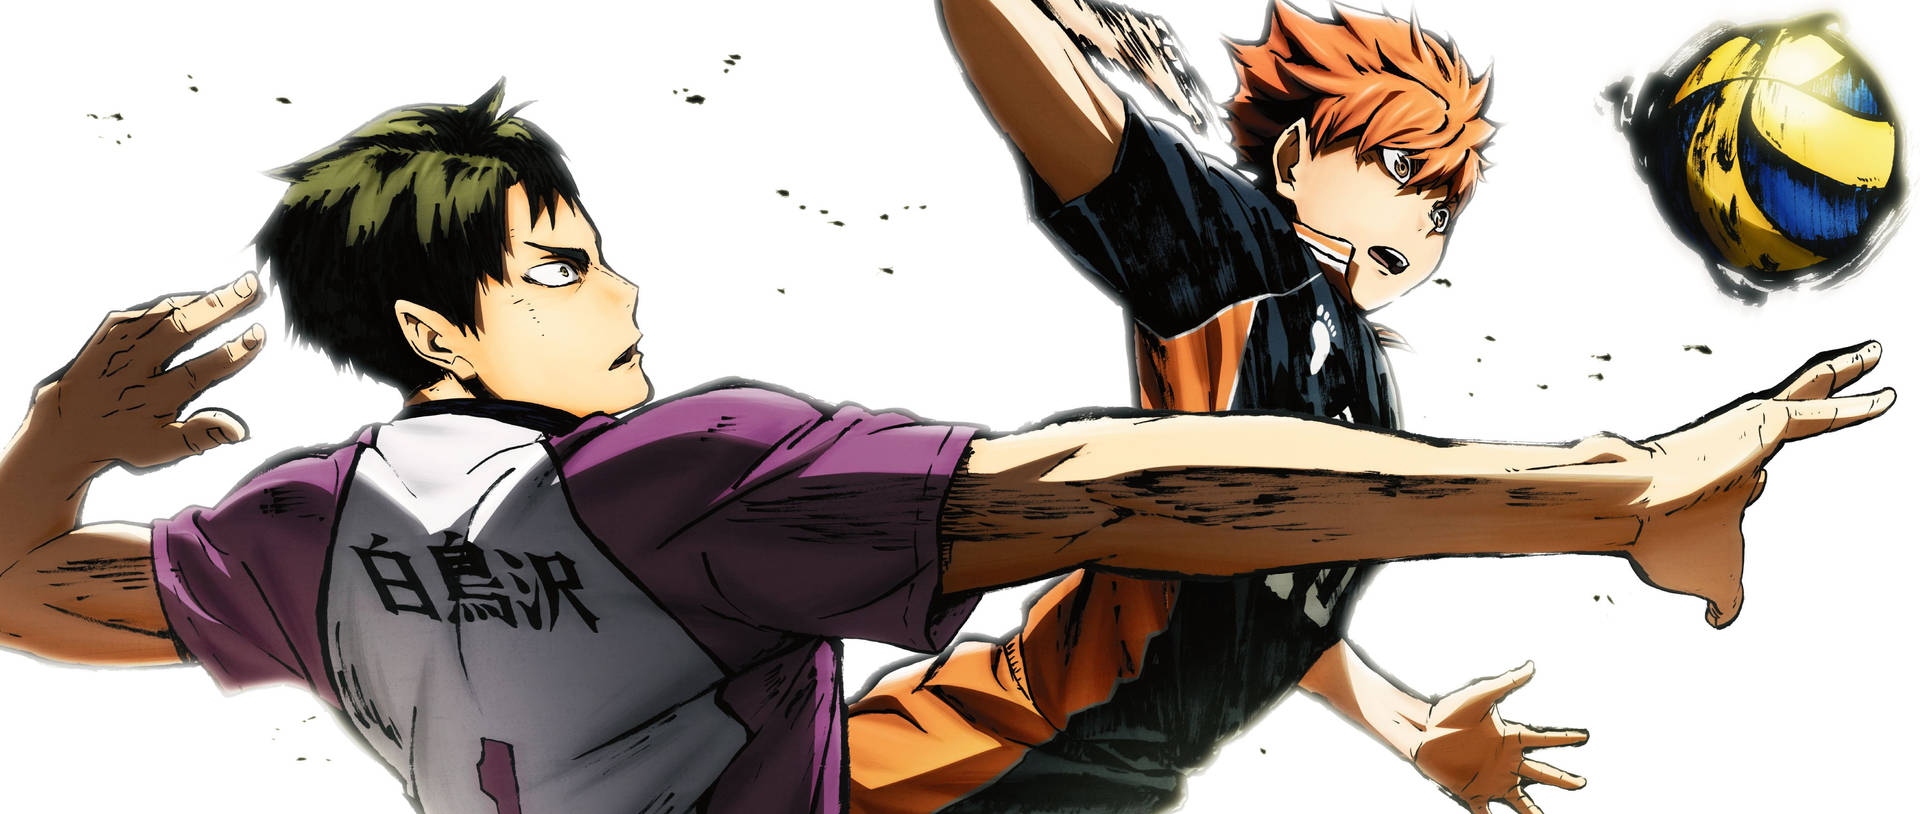 Ushijima and Hinata ready to spike their way to the top Wallpaper